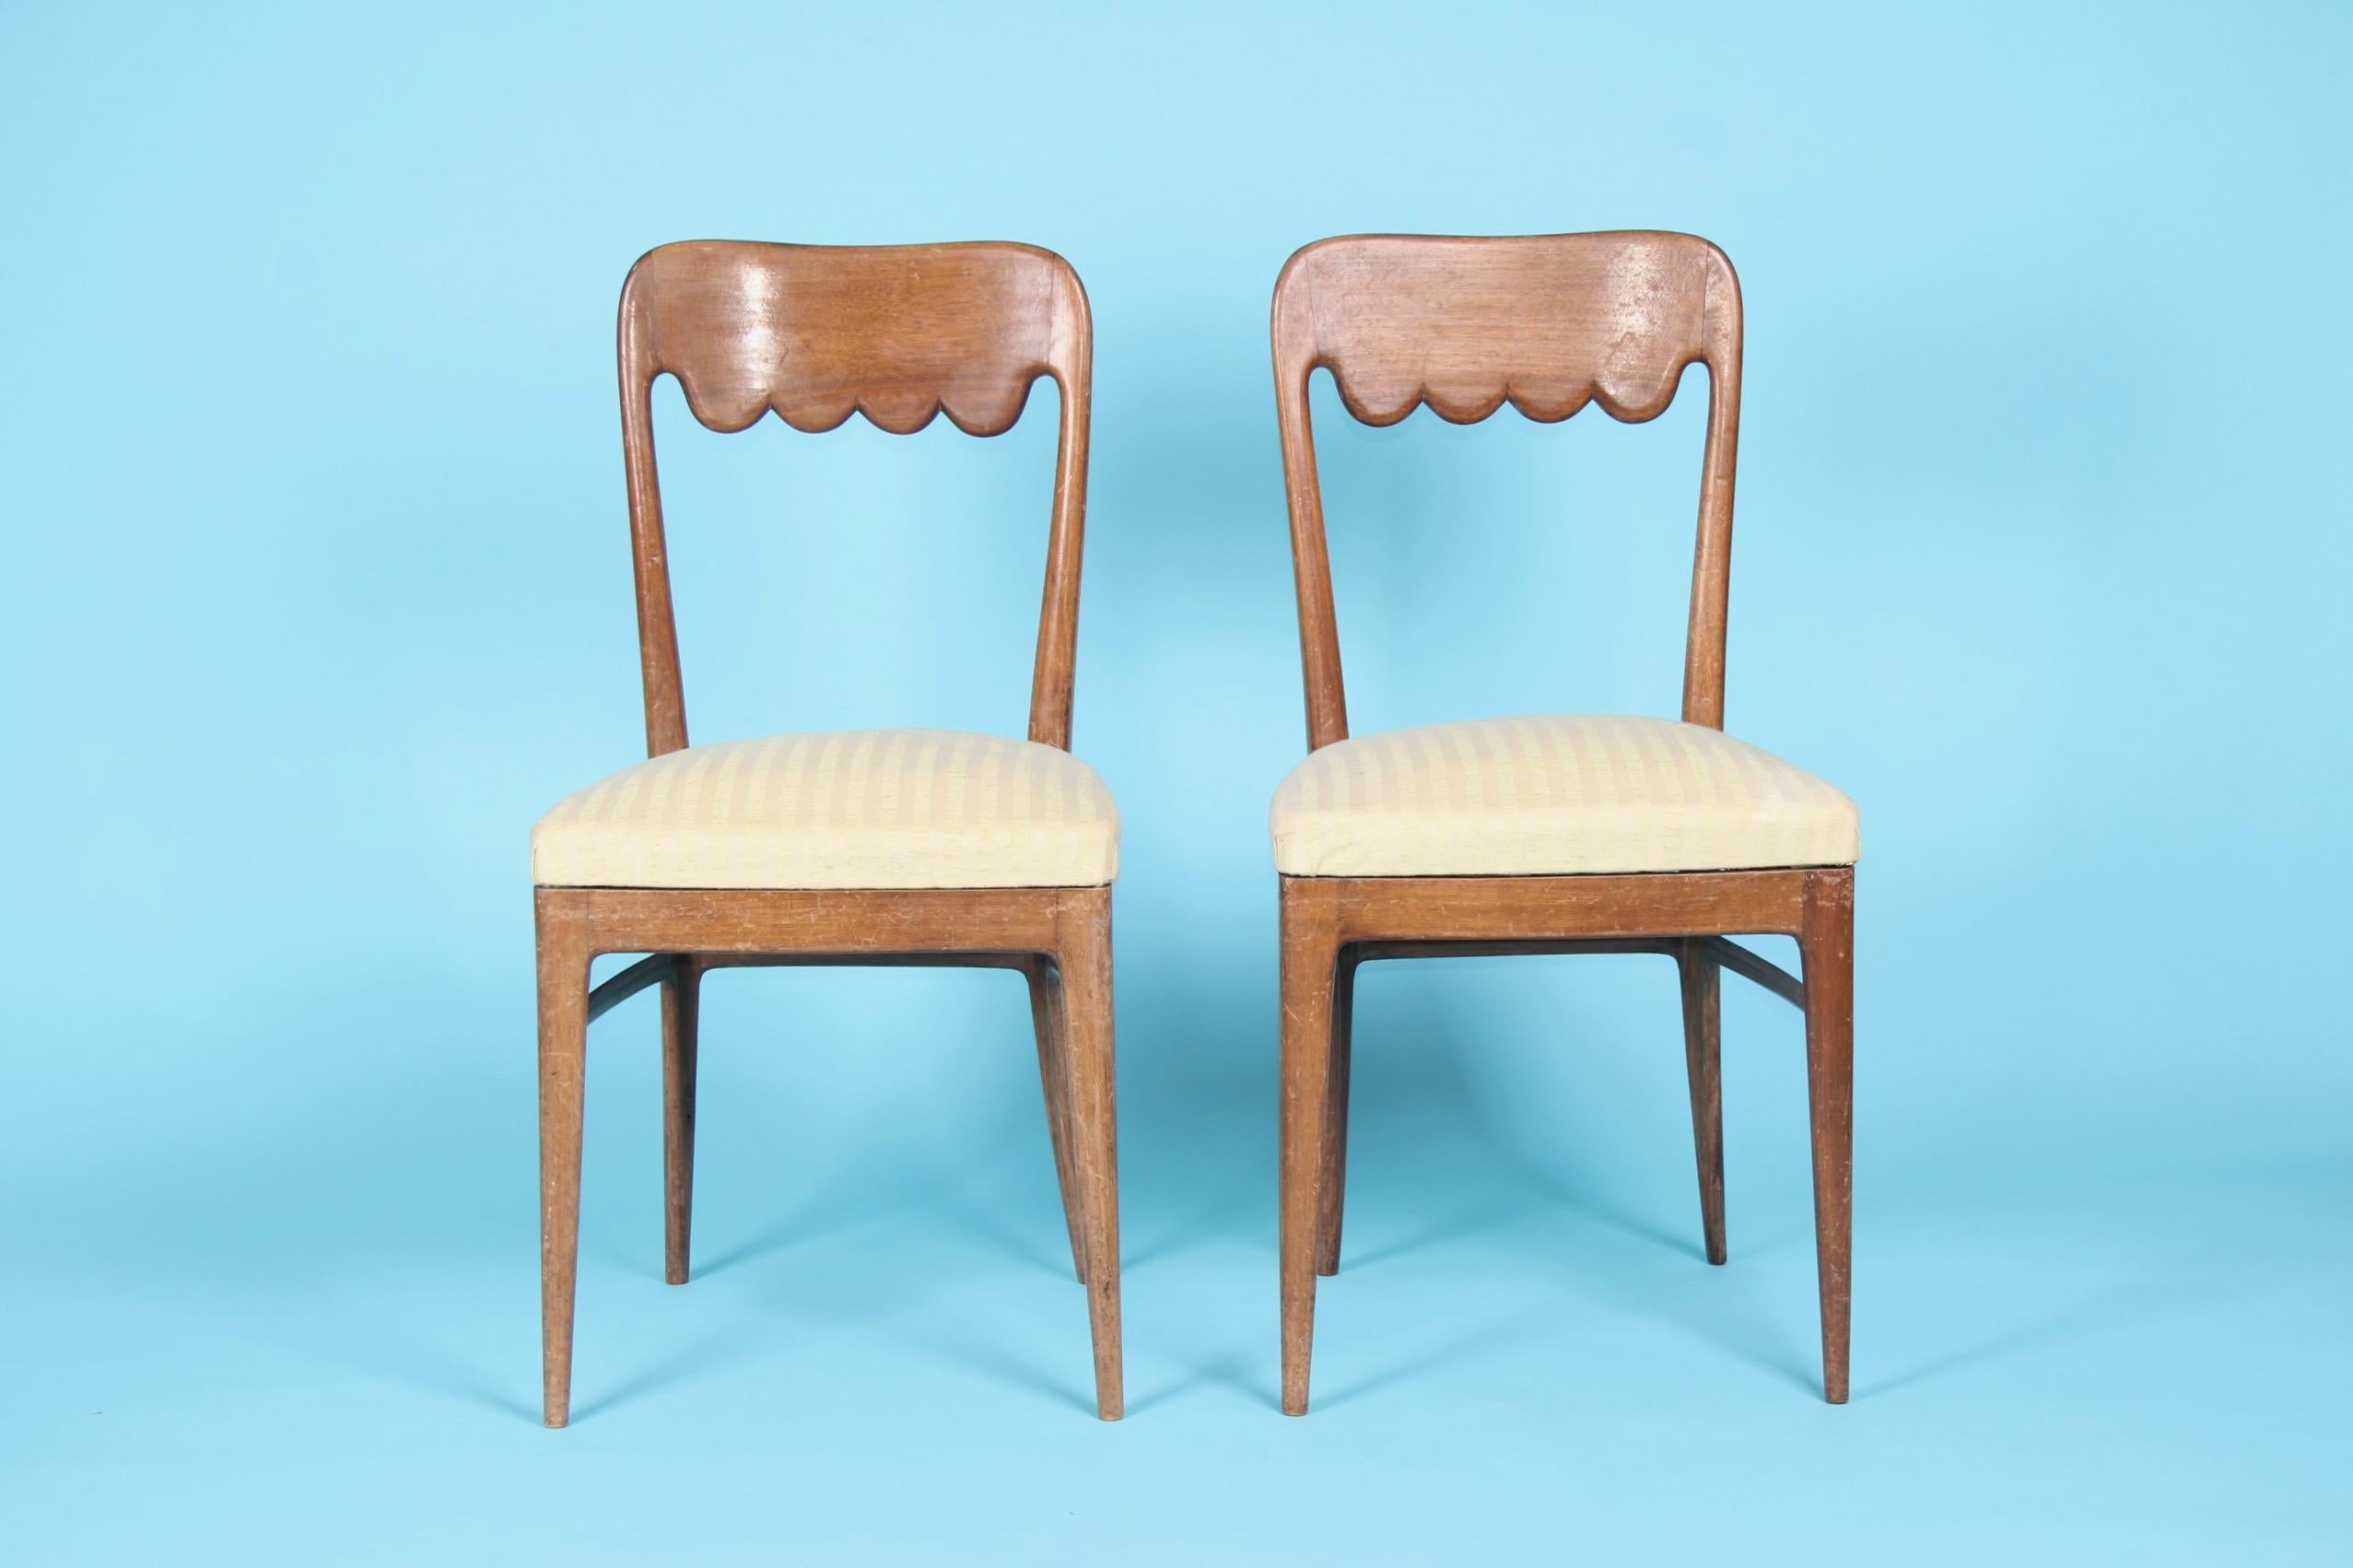 Pair of Italian chairs, some scratches on the wood.